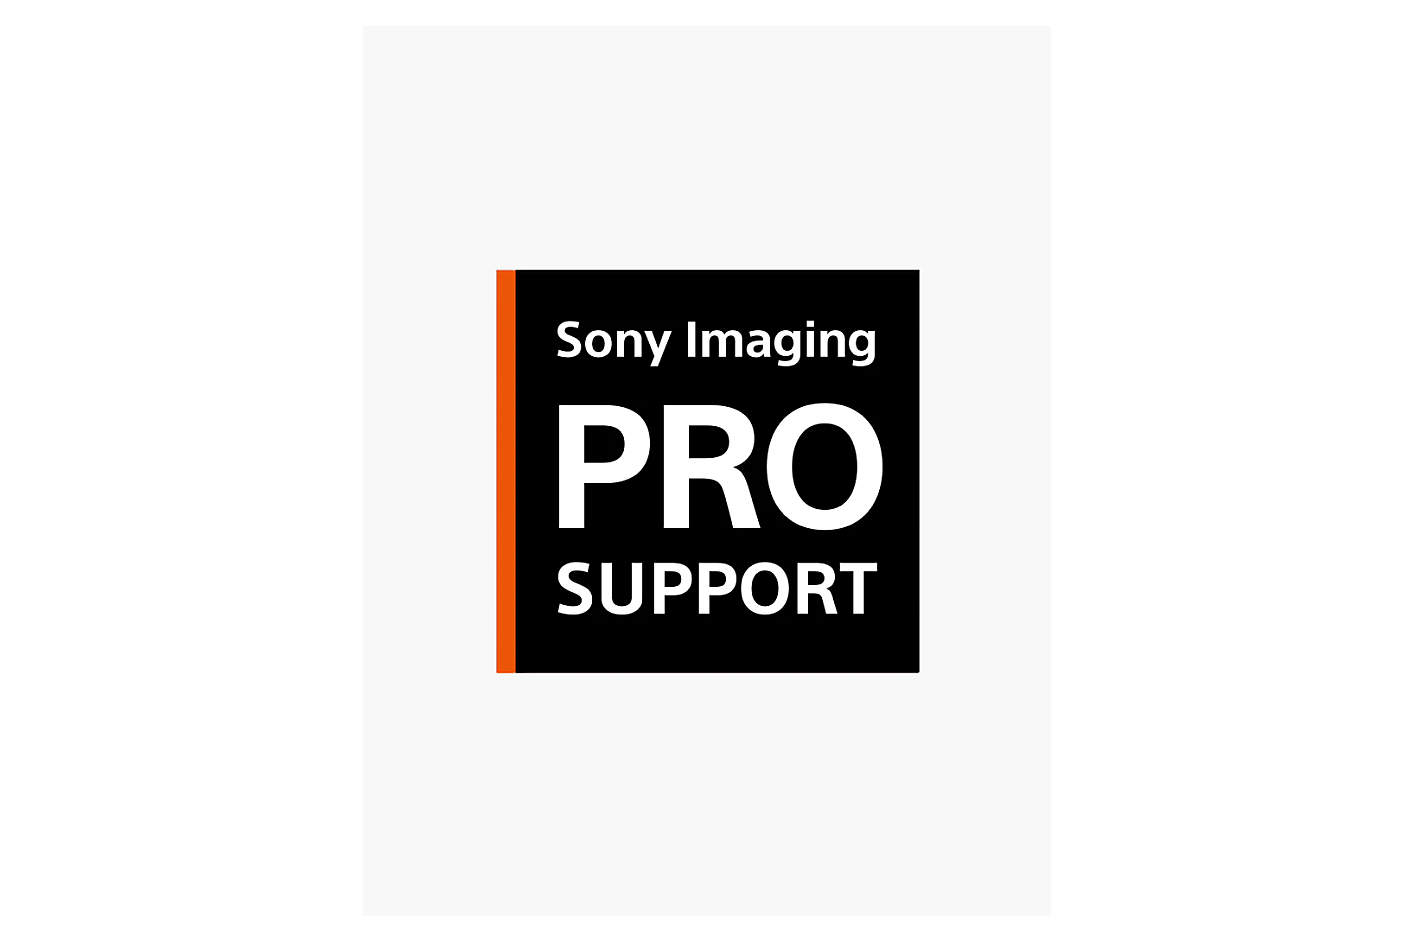 Logótipo de Sony Imaging Pro Support